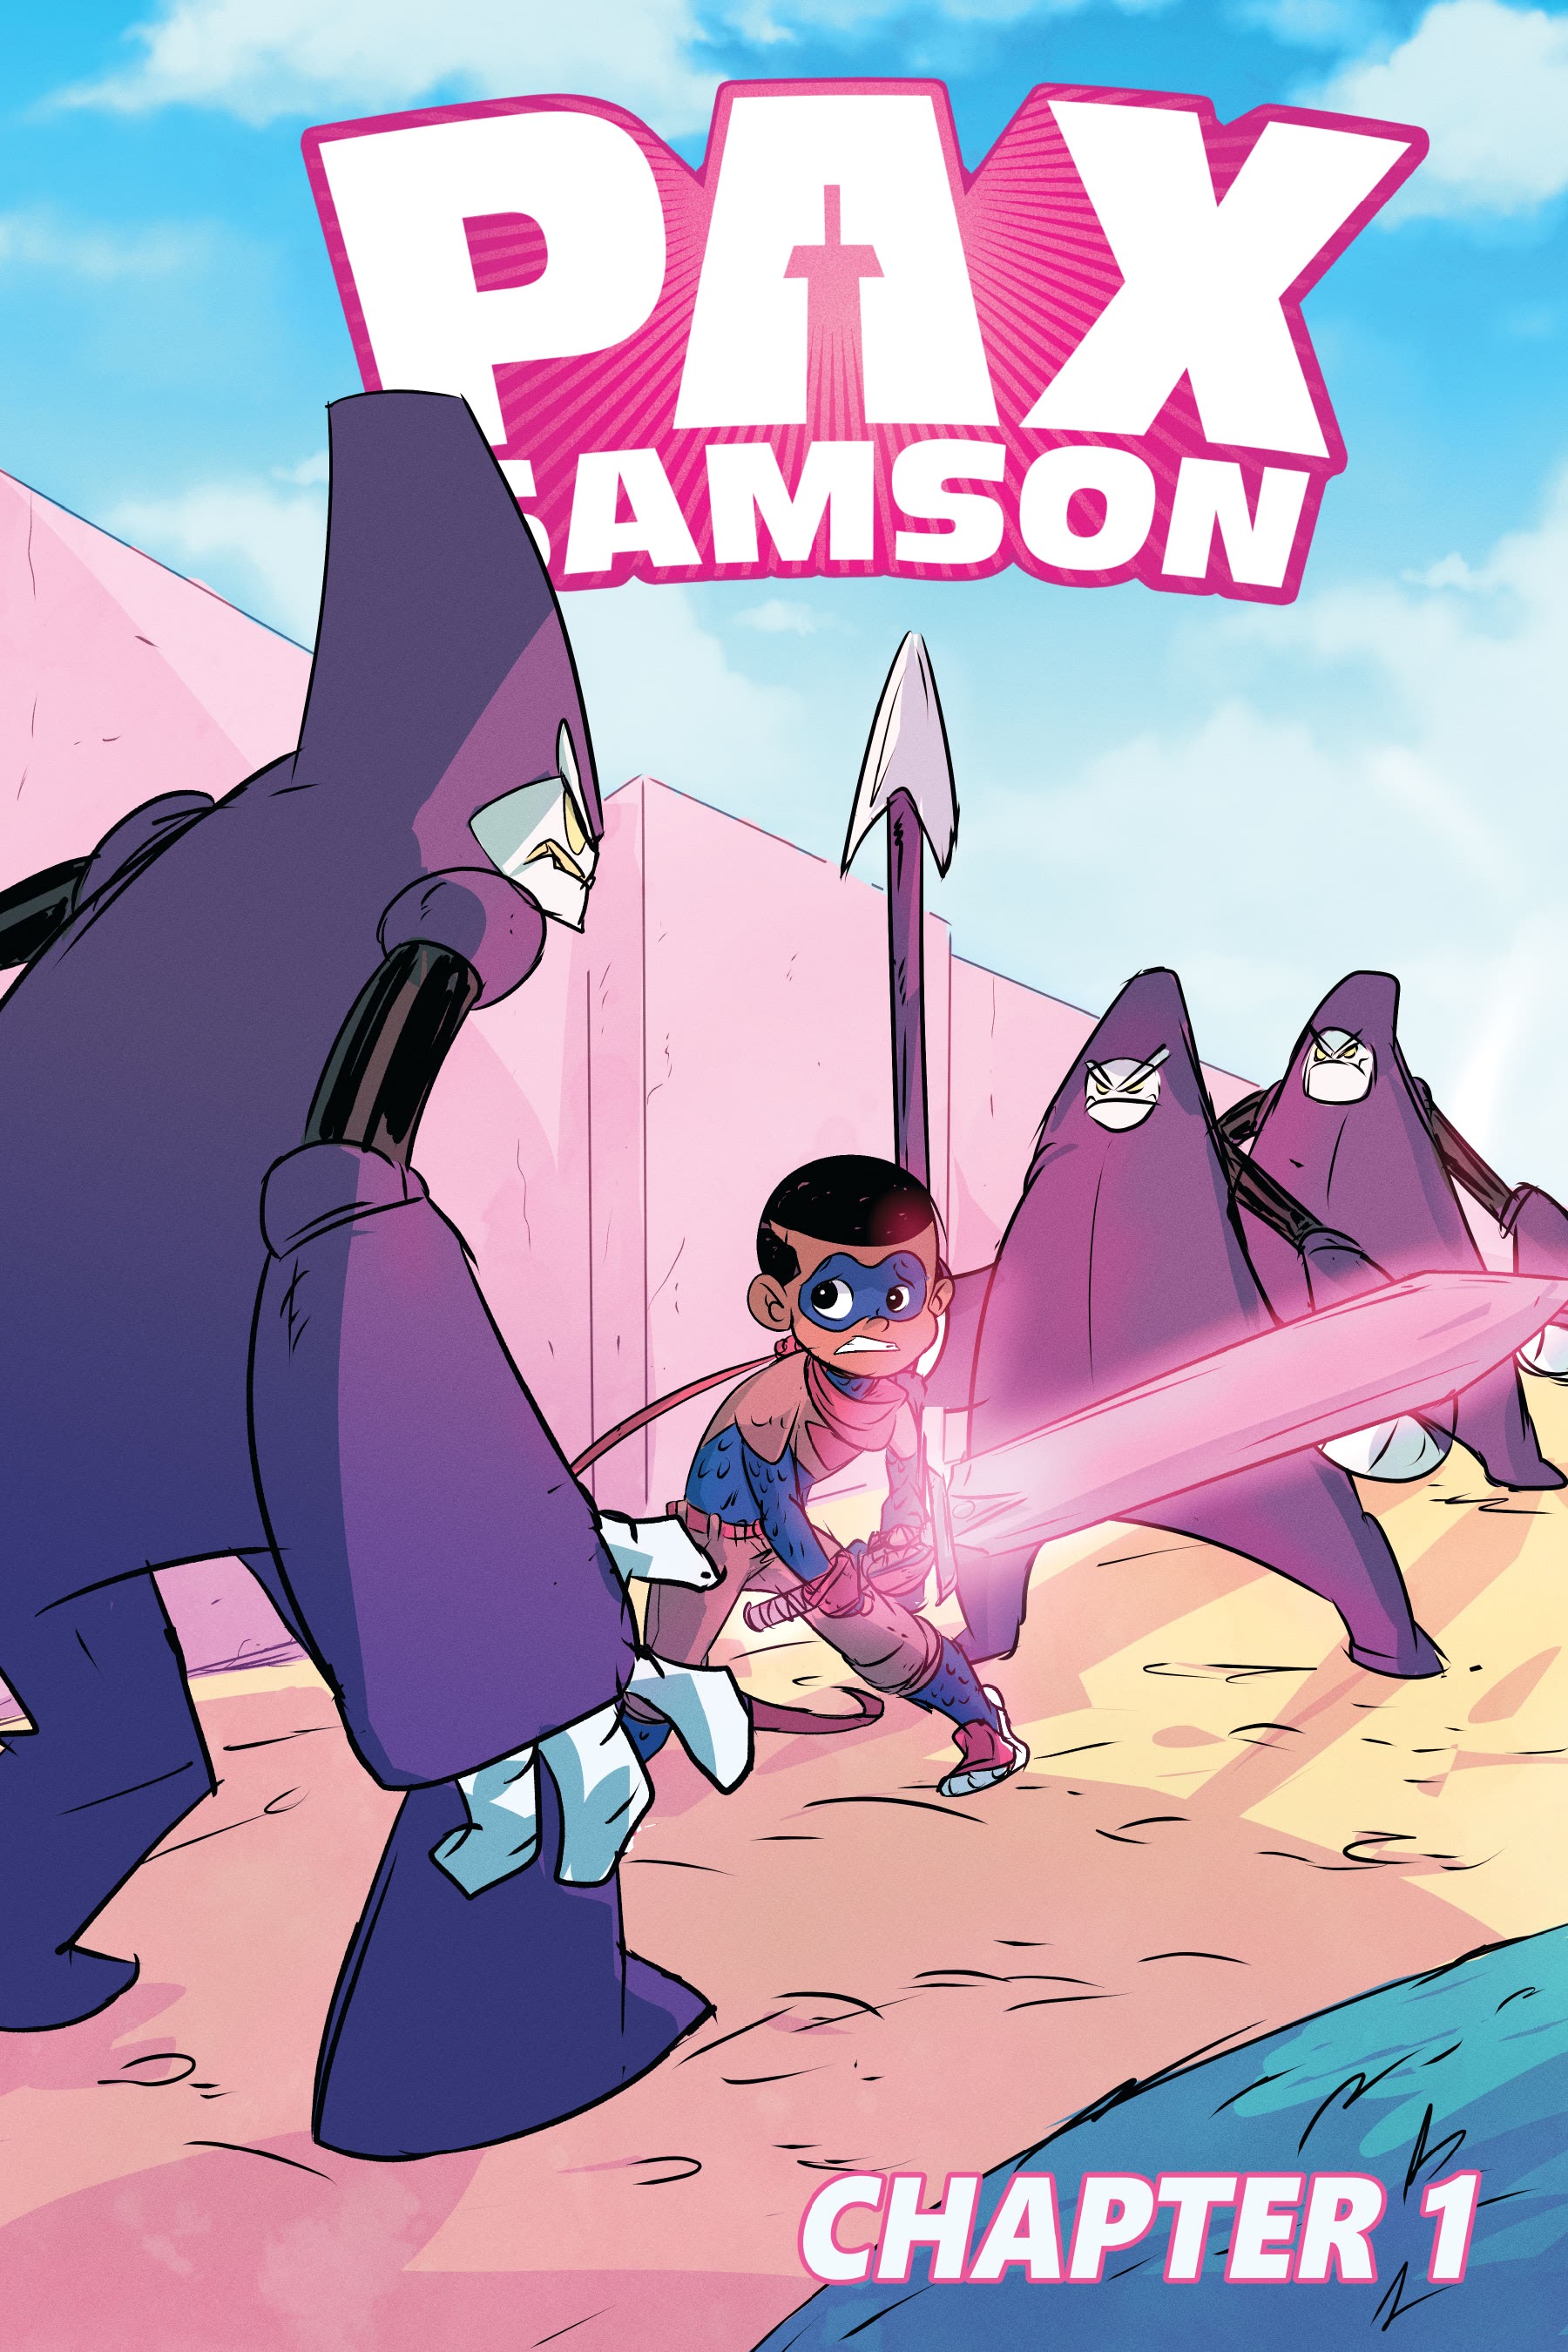 Read online Pax Samson: The Cookout comic -  Issue # TPB (Part 1) - 5